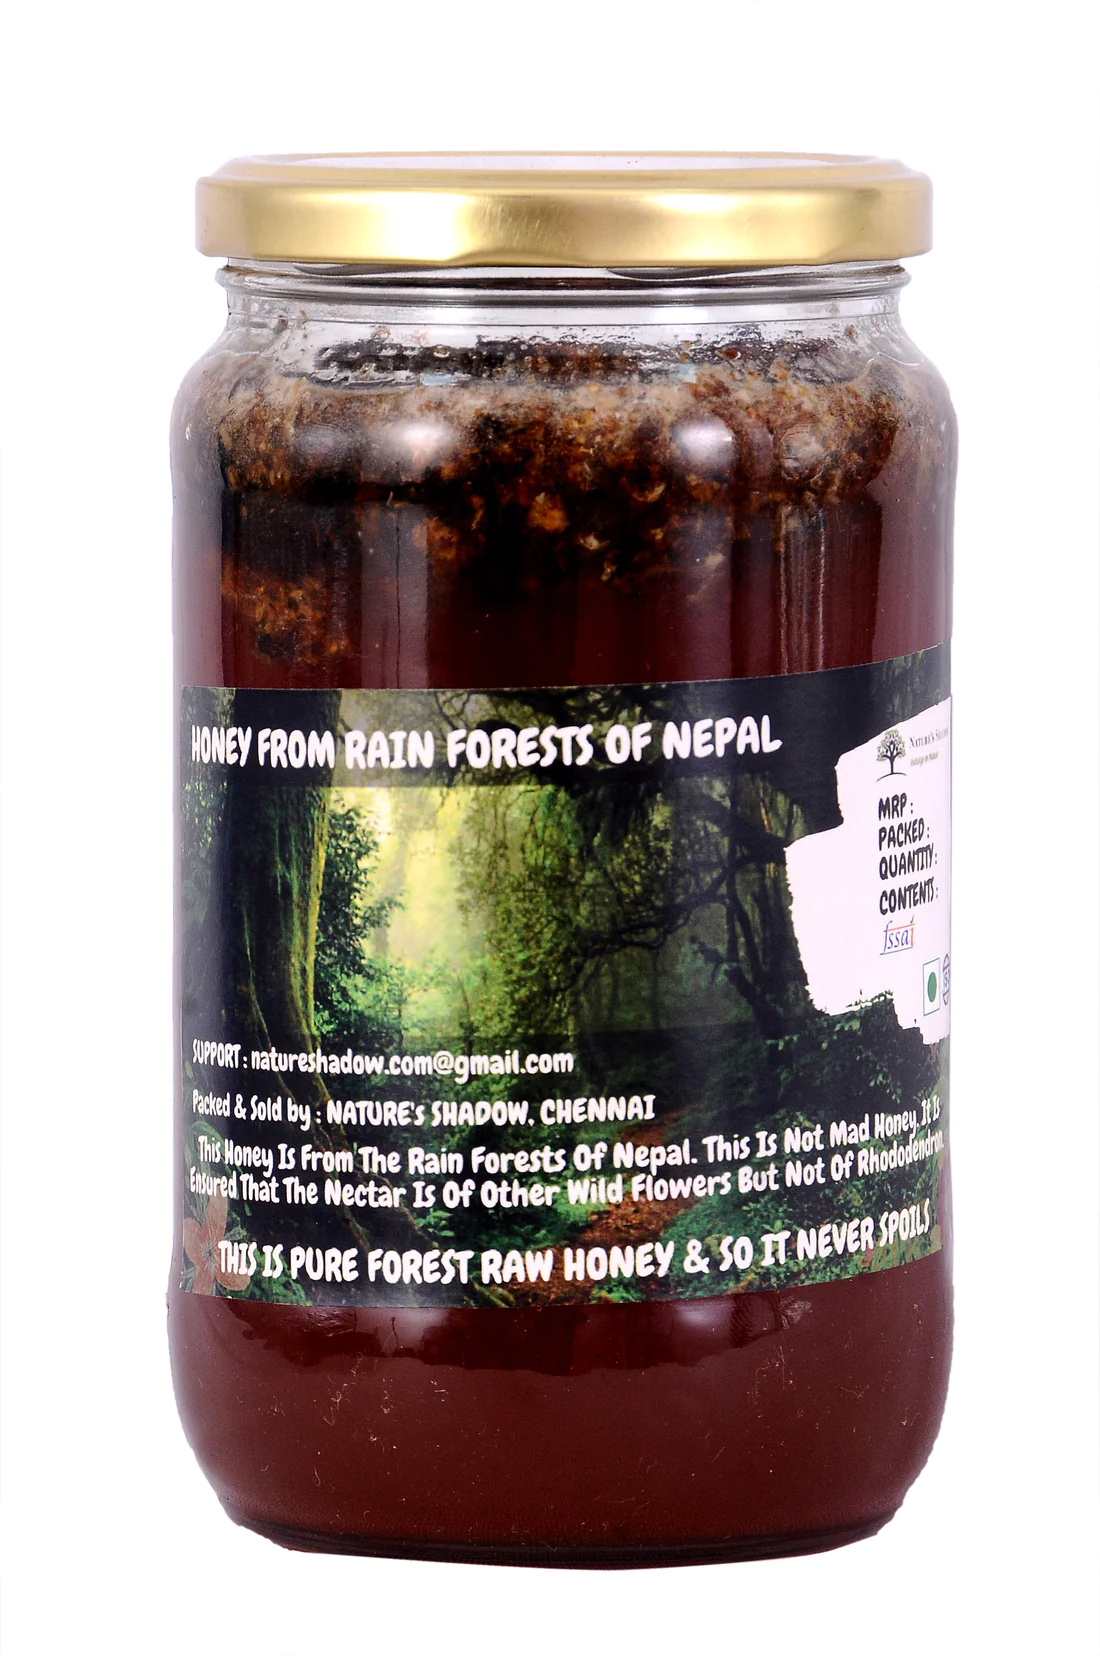 Nepalese Origin : Wild Honey From the Rain Forests Of Nepal (This honey might cryztallize easily)